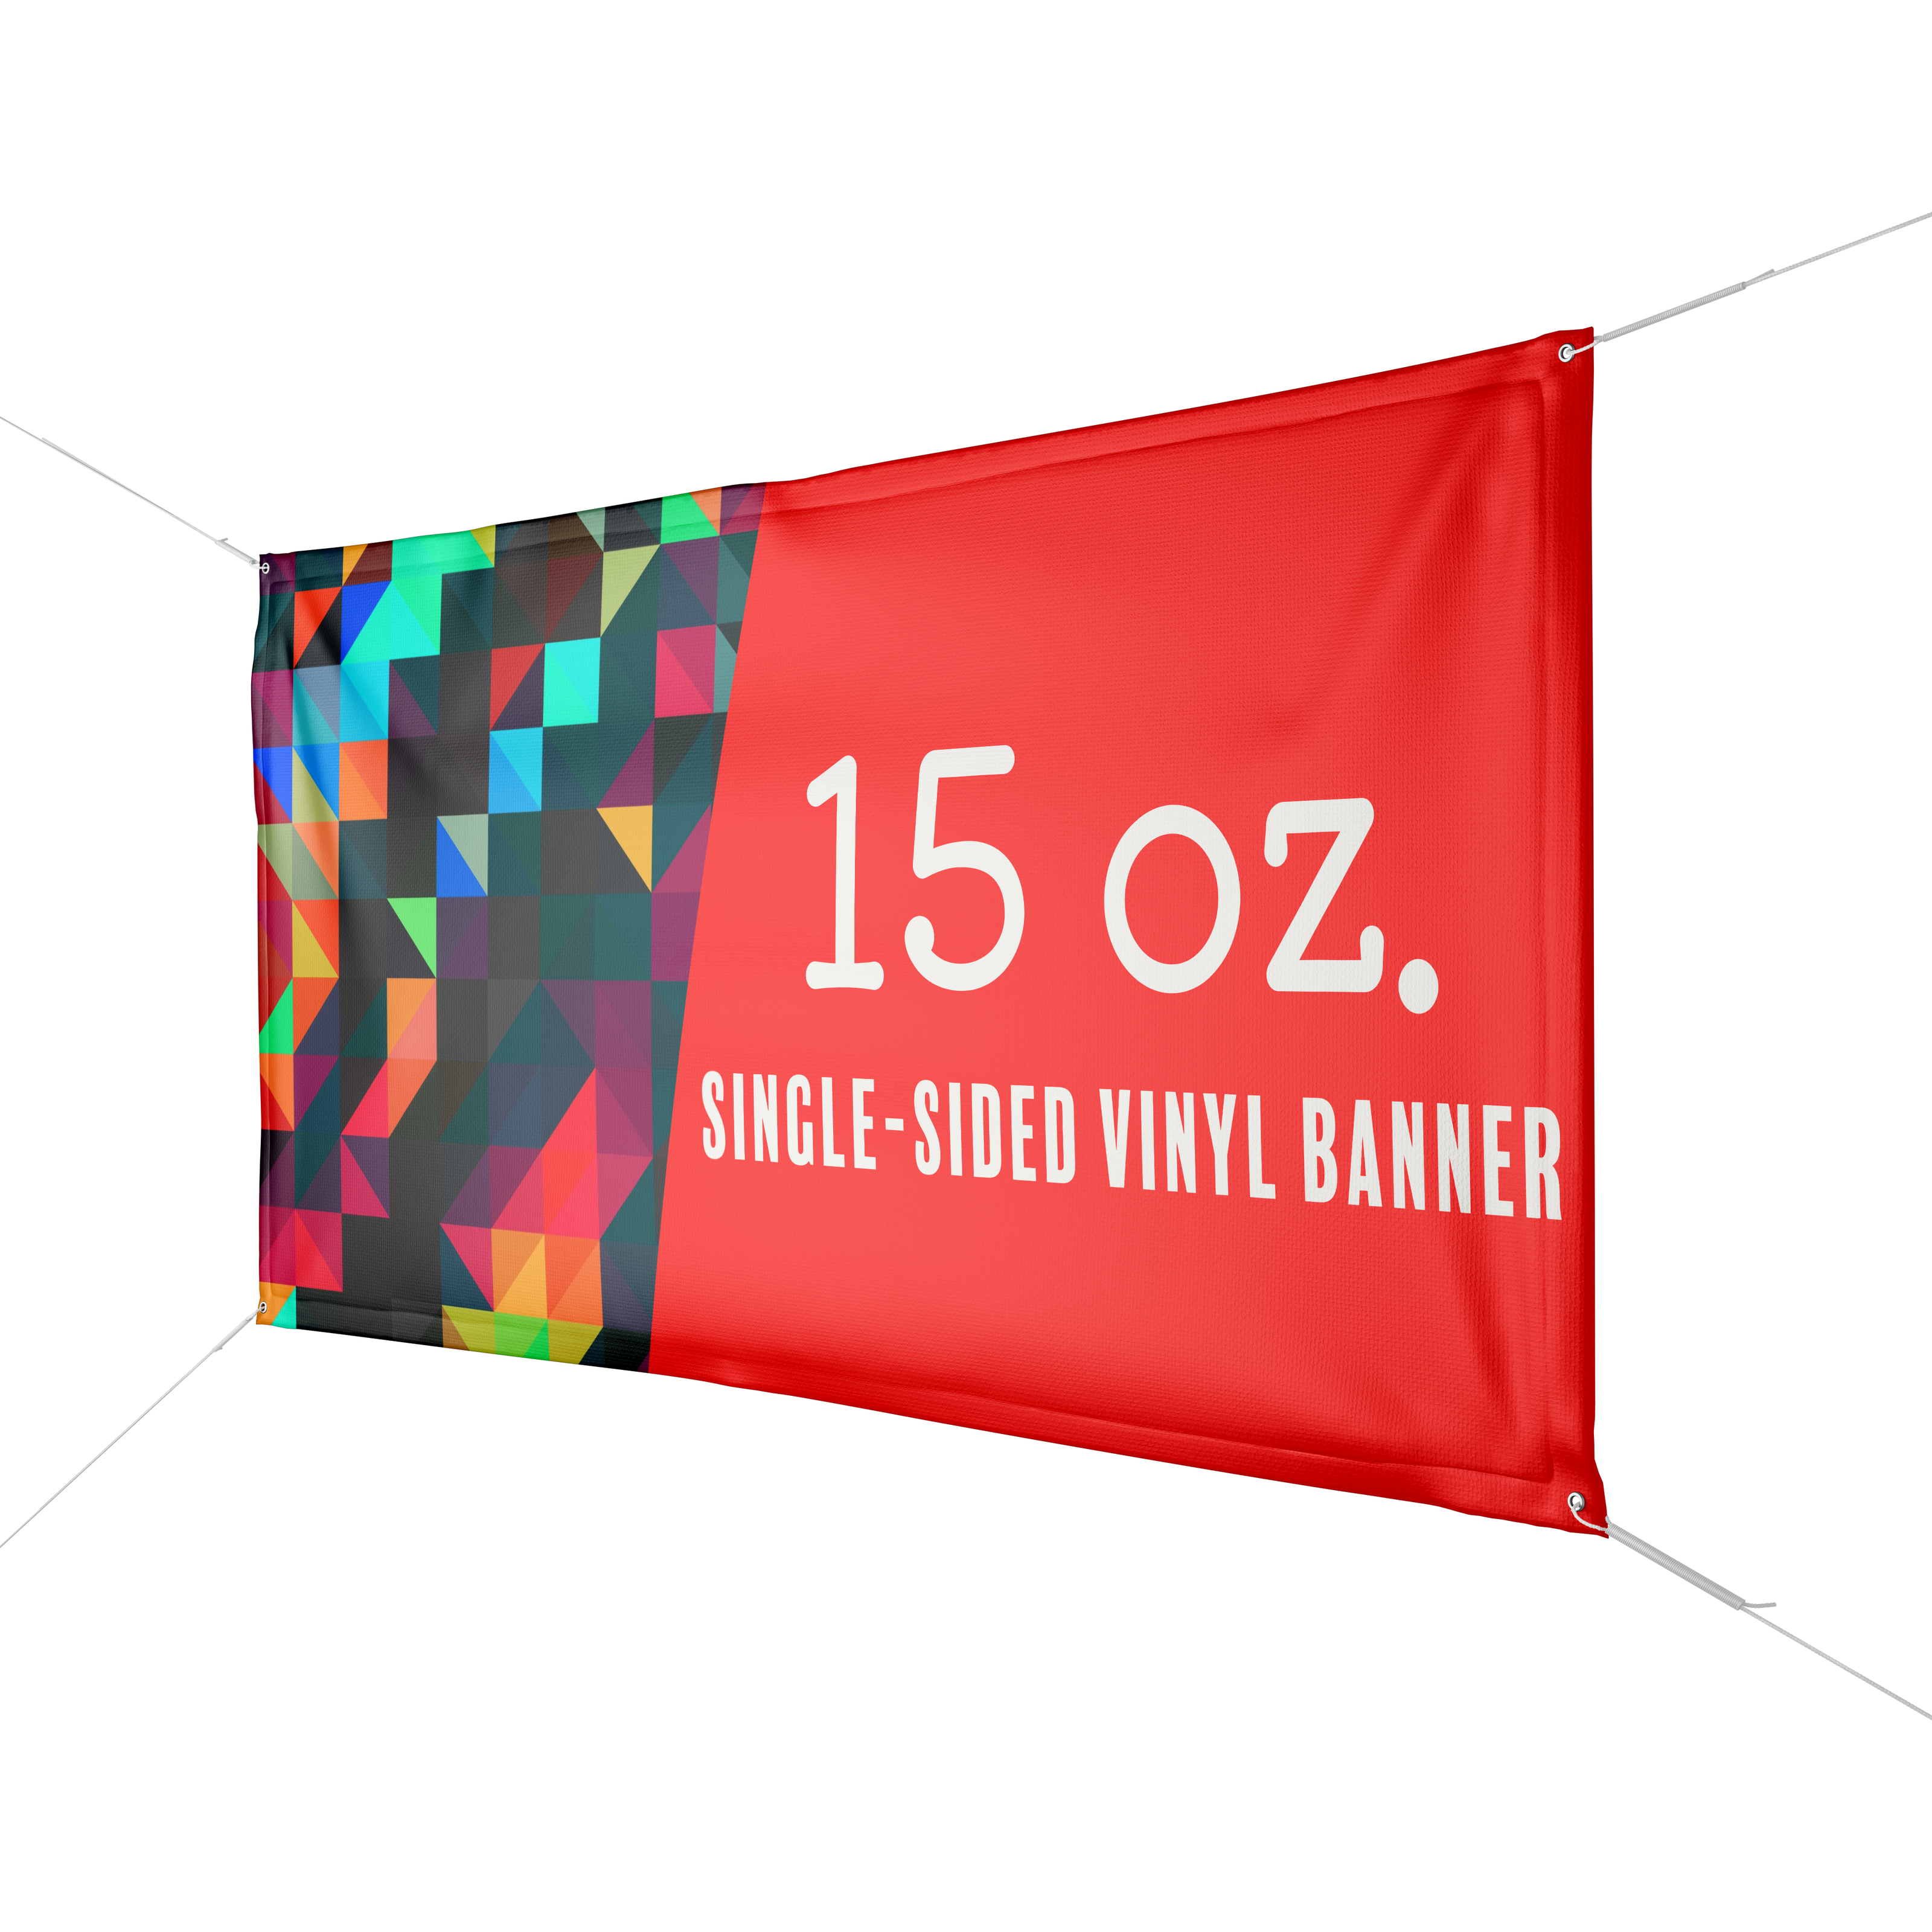 A colorful banner is displayed to show an example of a 15 oz vinyl banner.